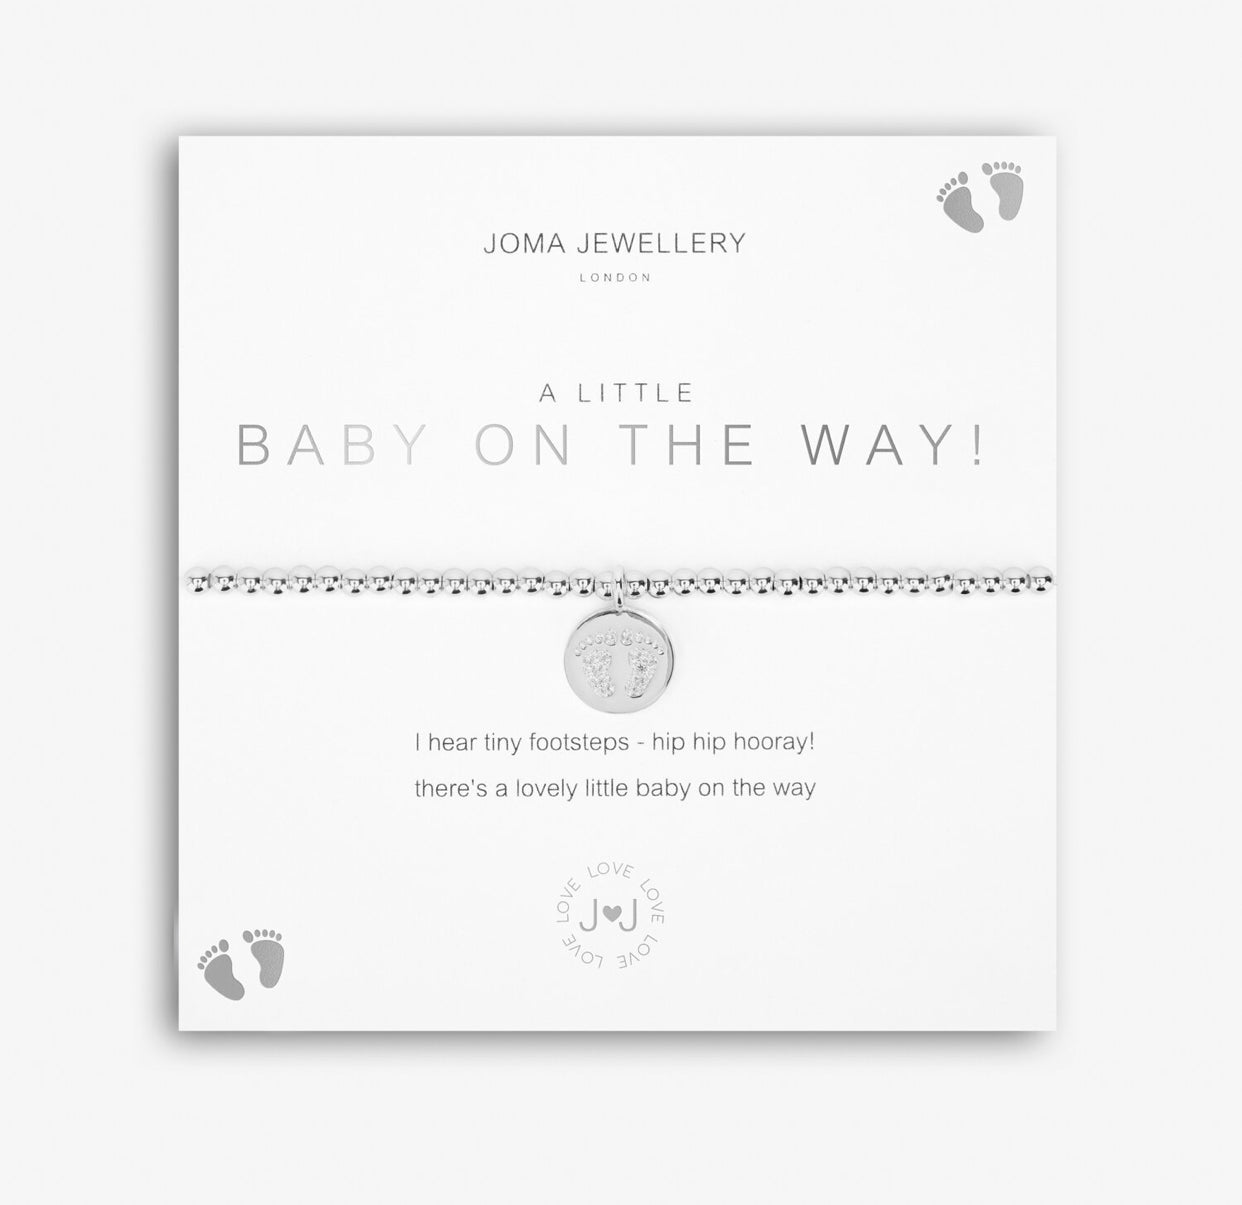 Joma Jewellery 'A Little' Baby on the Way